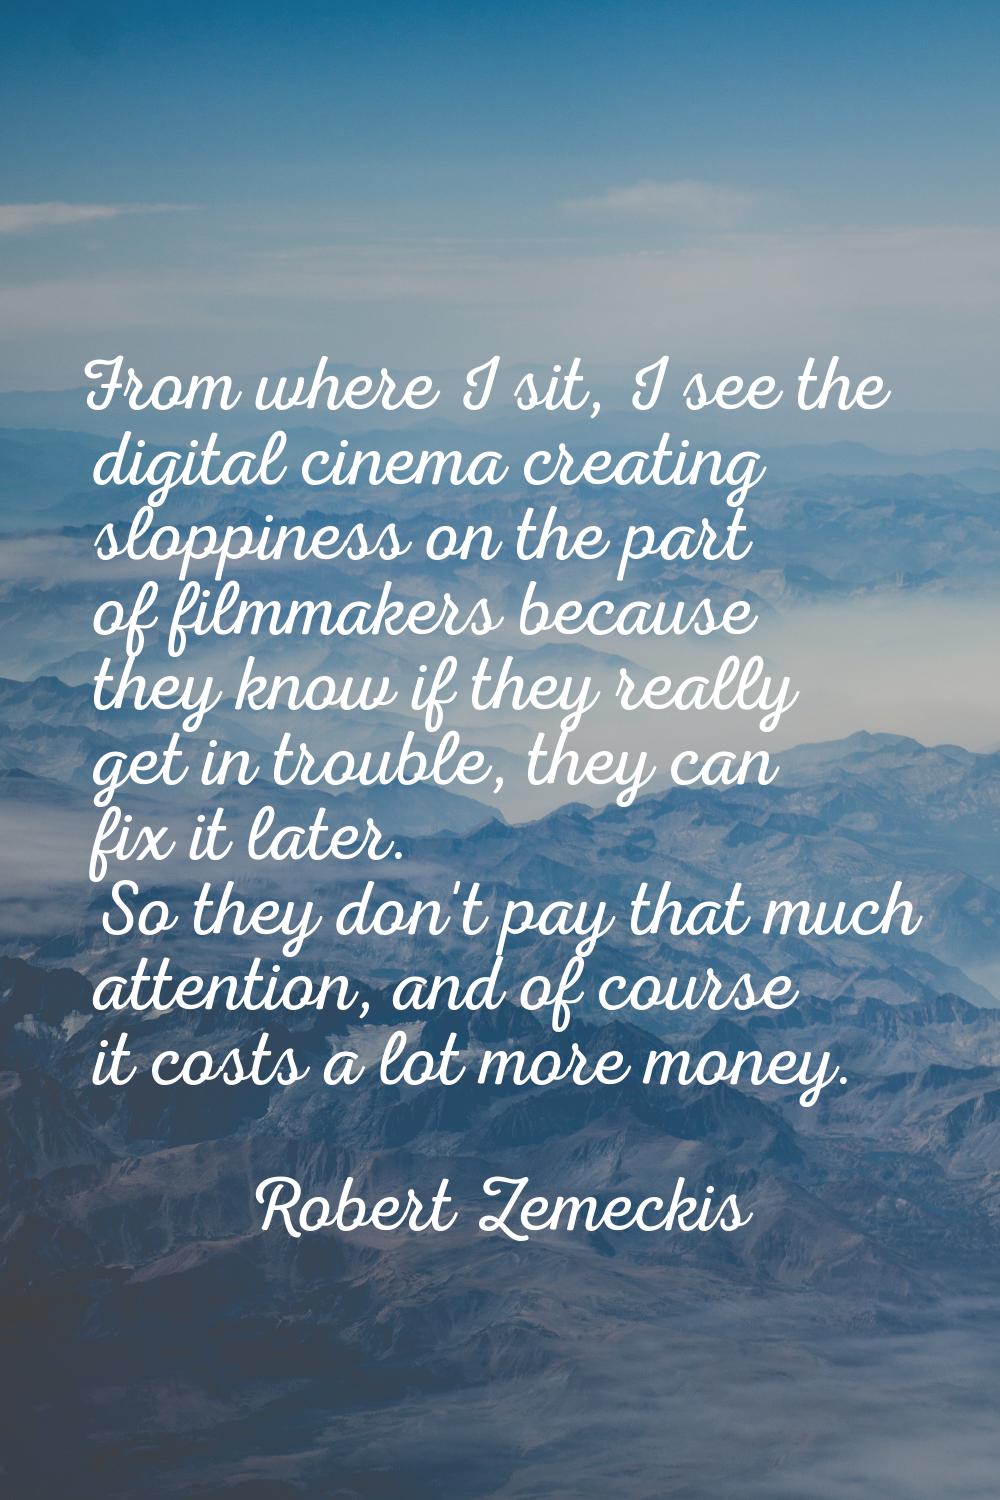 From where I sit, I see the digital cinema creating sloppiness on the part of filmmakers because th